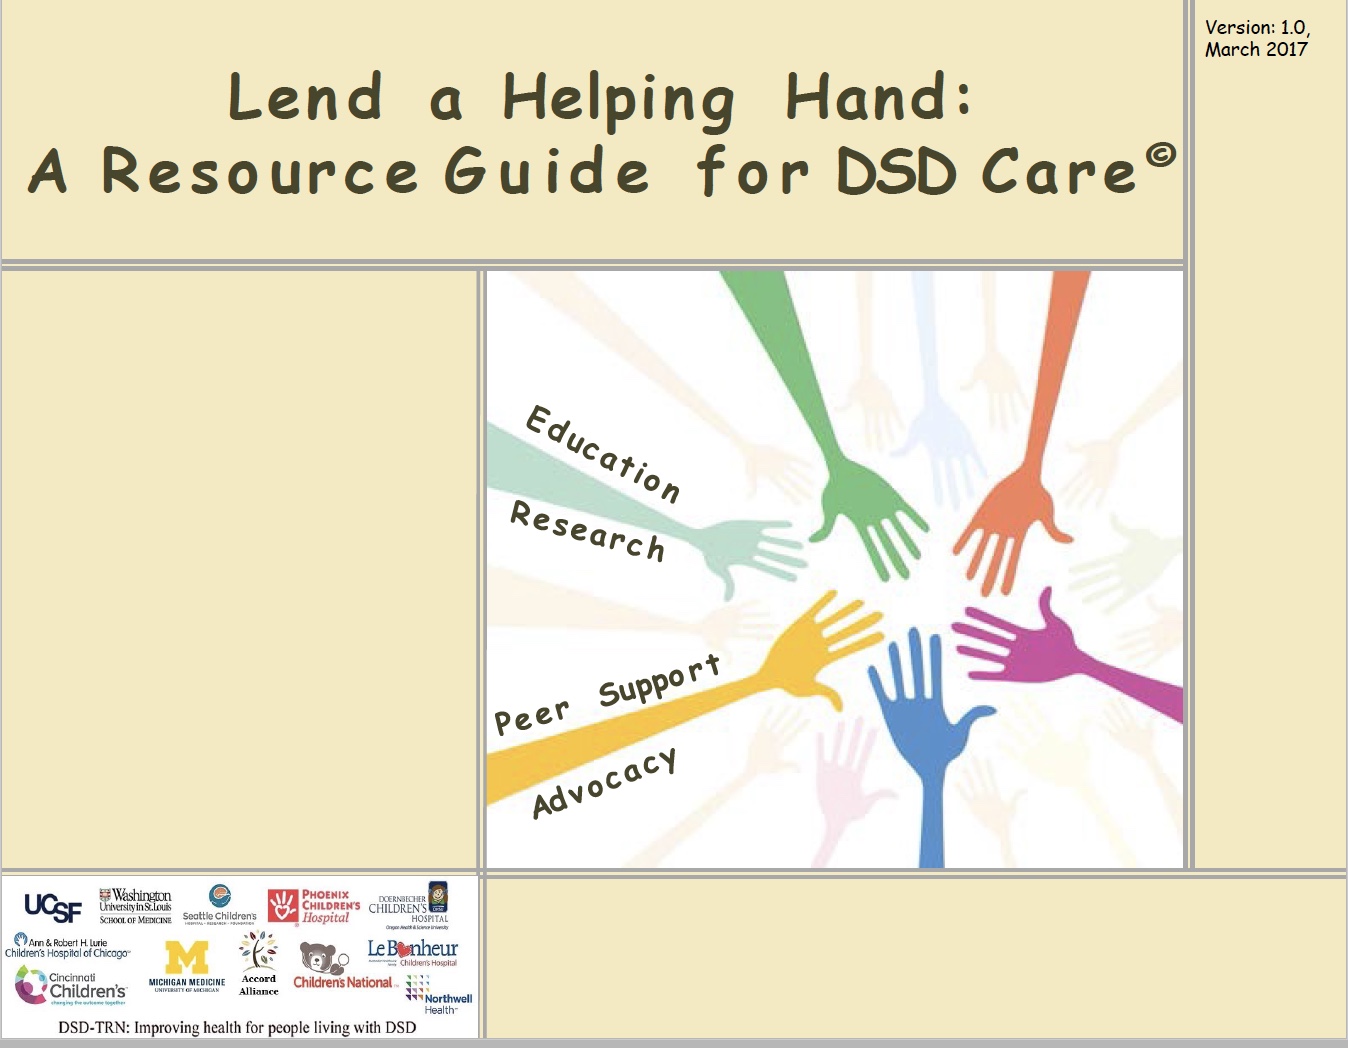 In the Lend a Helping Hand: Resource Guide for DSD Care, you can find. 